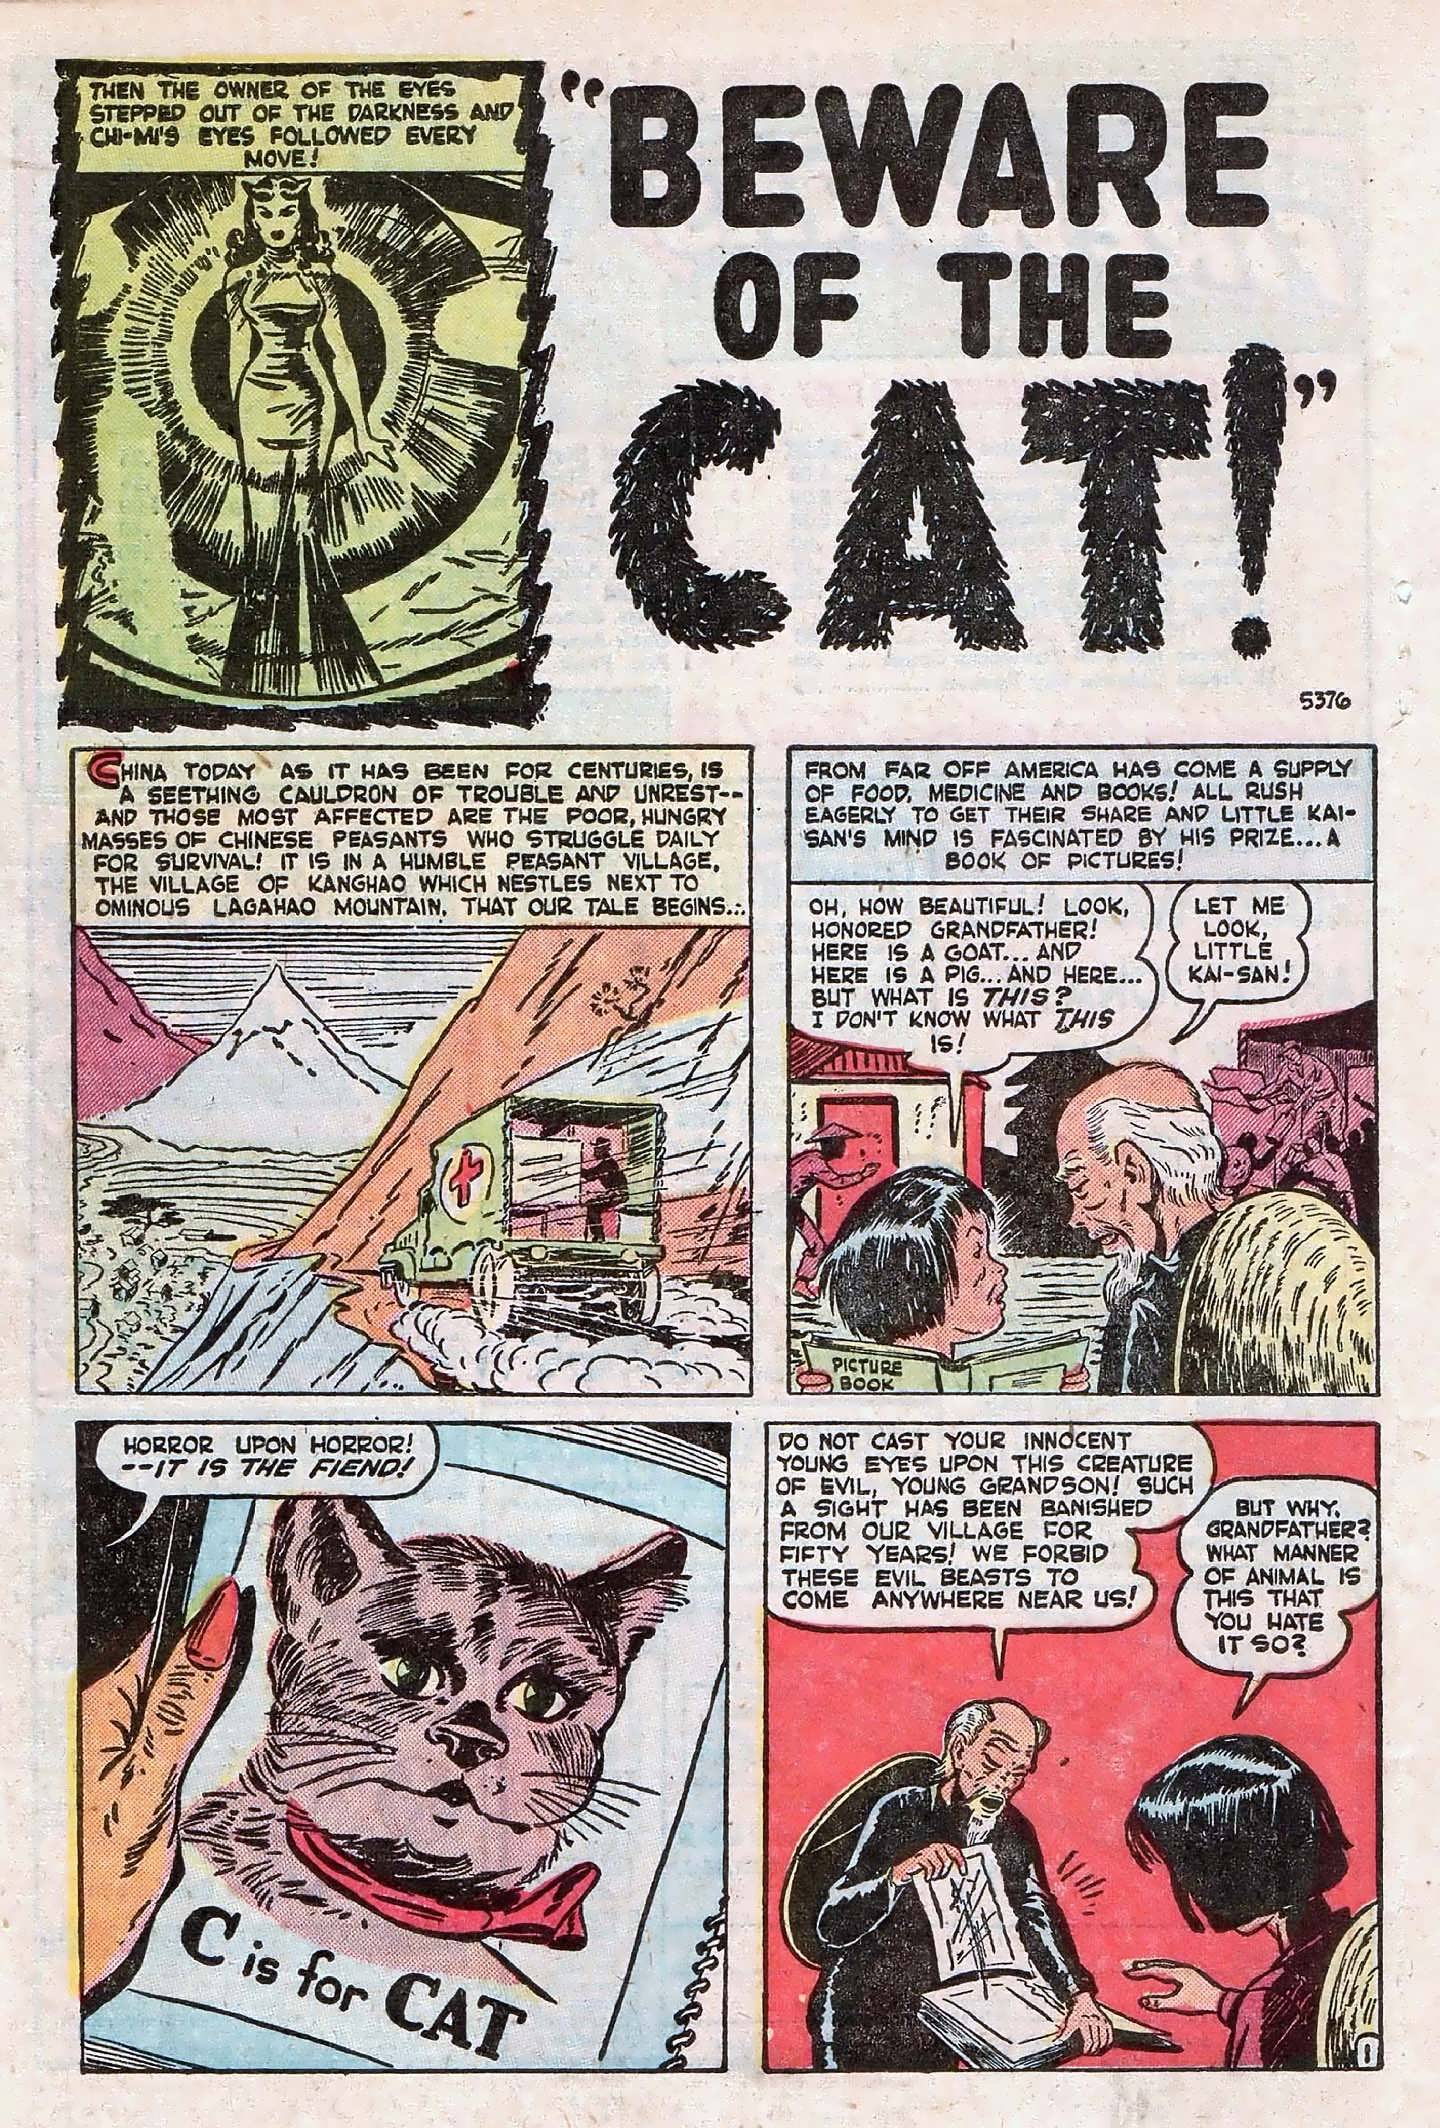 Marvel Tales (1949) 93 Page 31